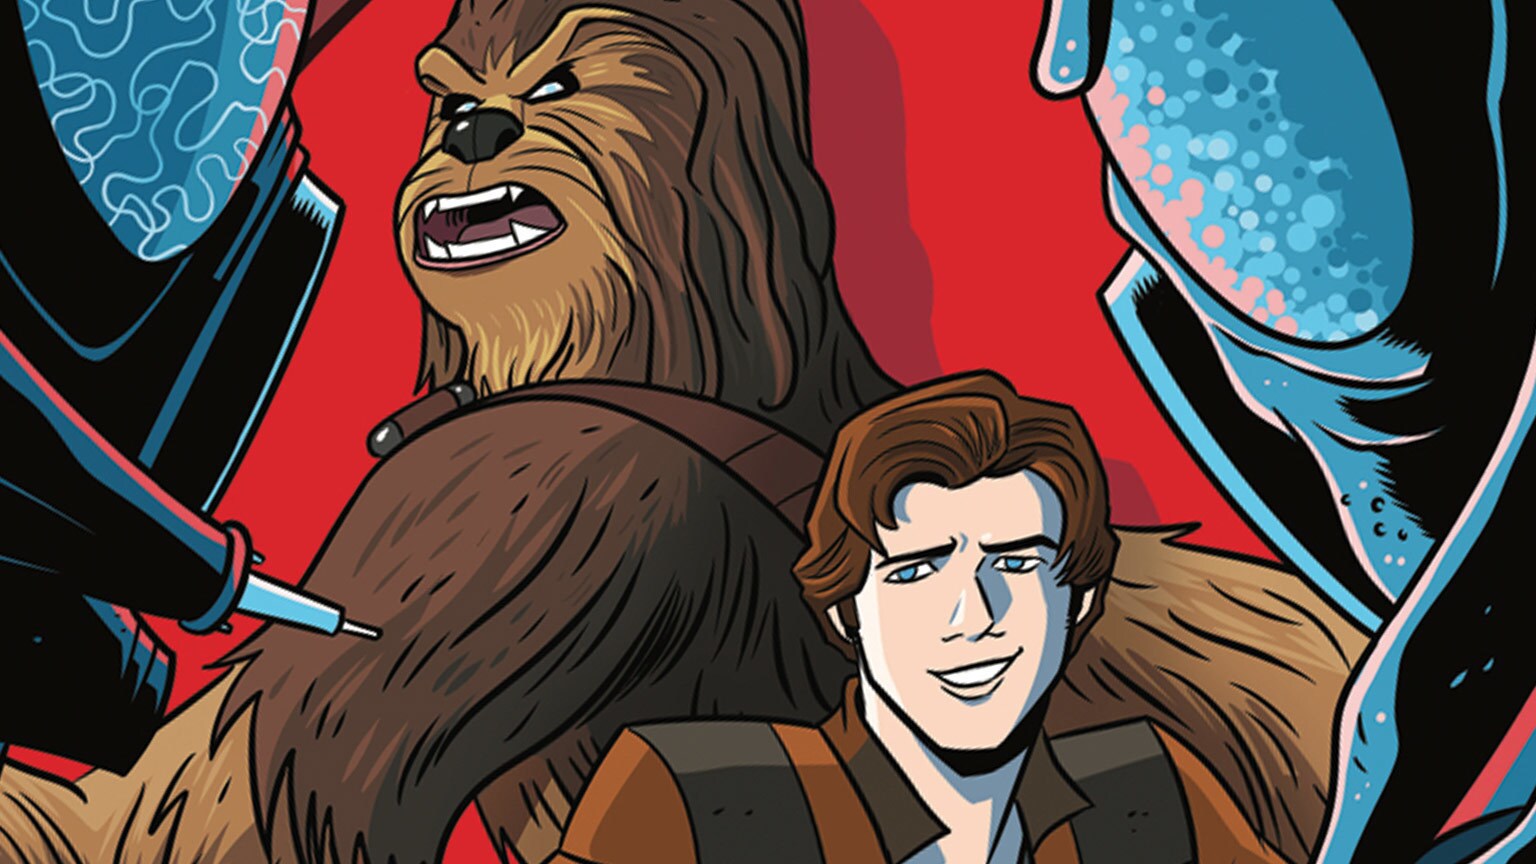 Star Wars Adventures Free Comic Book Day 2018 – Exclusive Preview!